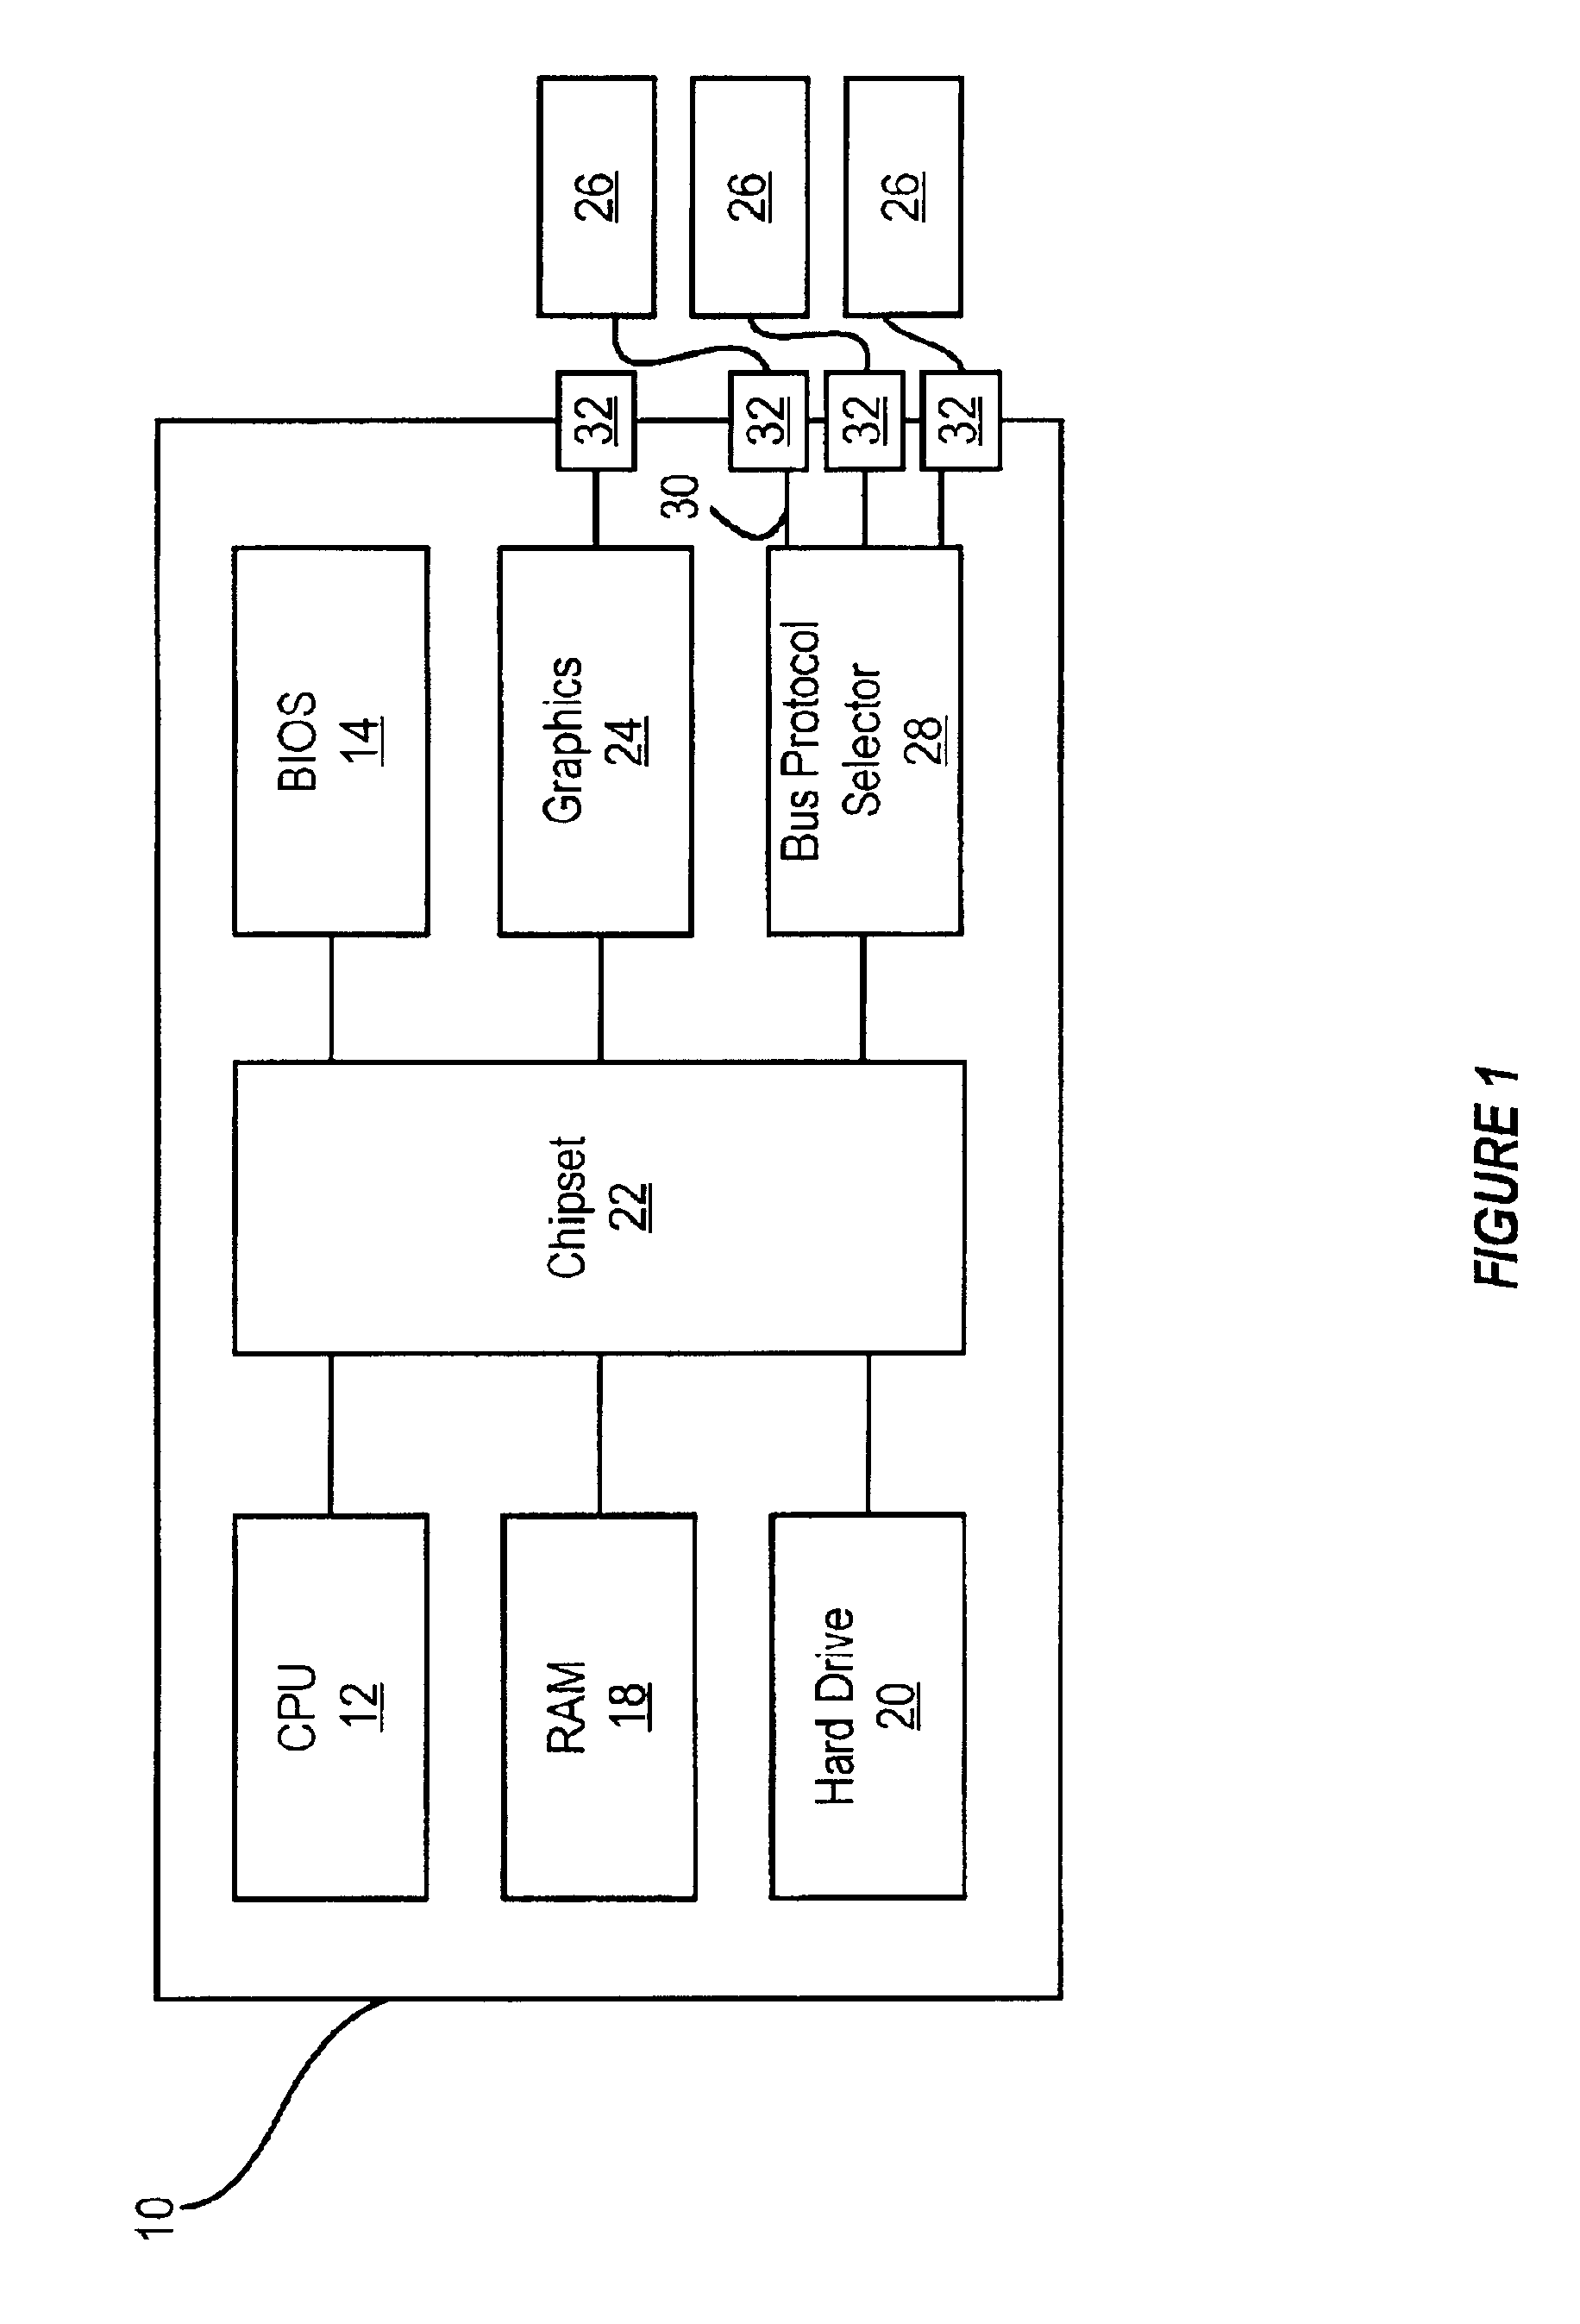 Method and system for configuring a set of wire lines to communicate with AC or DC coupled protocols